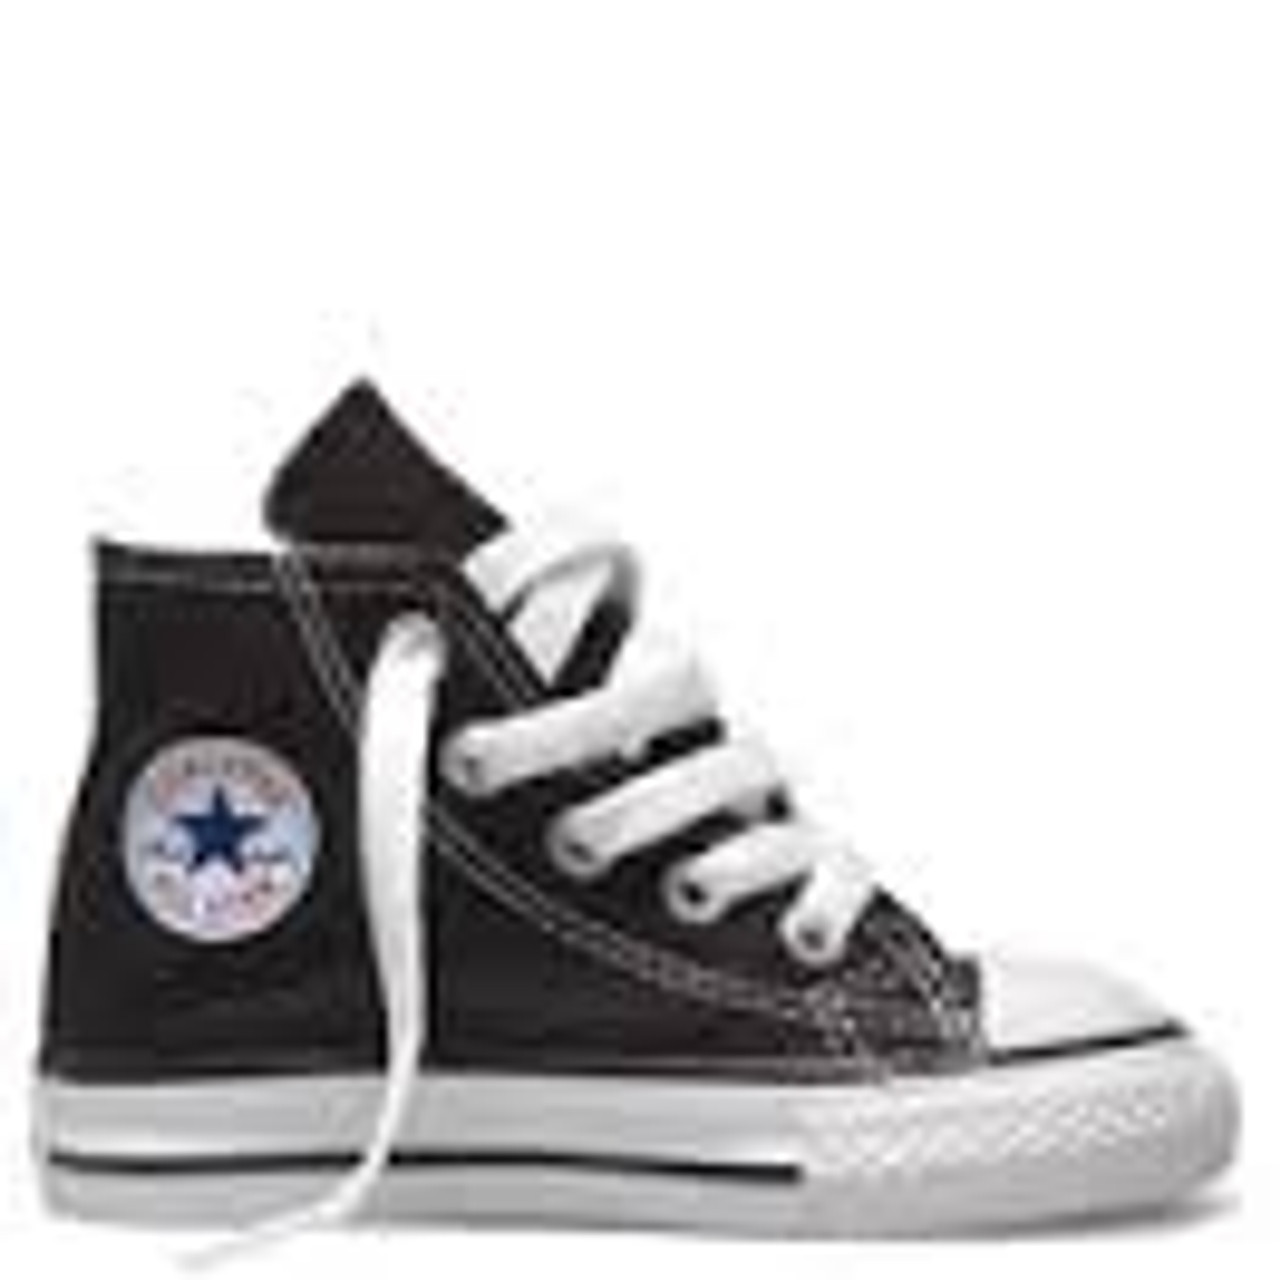 Converse Chuck Taylor Hi Canvas All Star Classic Colors Youth (4-7 yrs.)